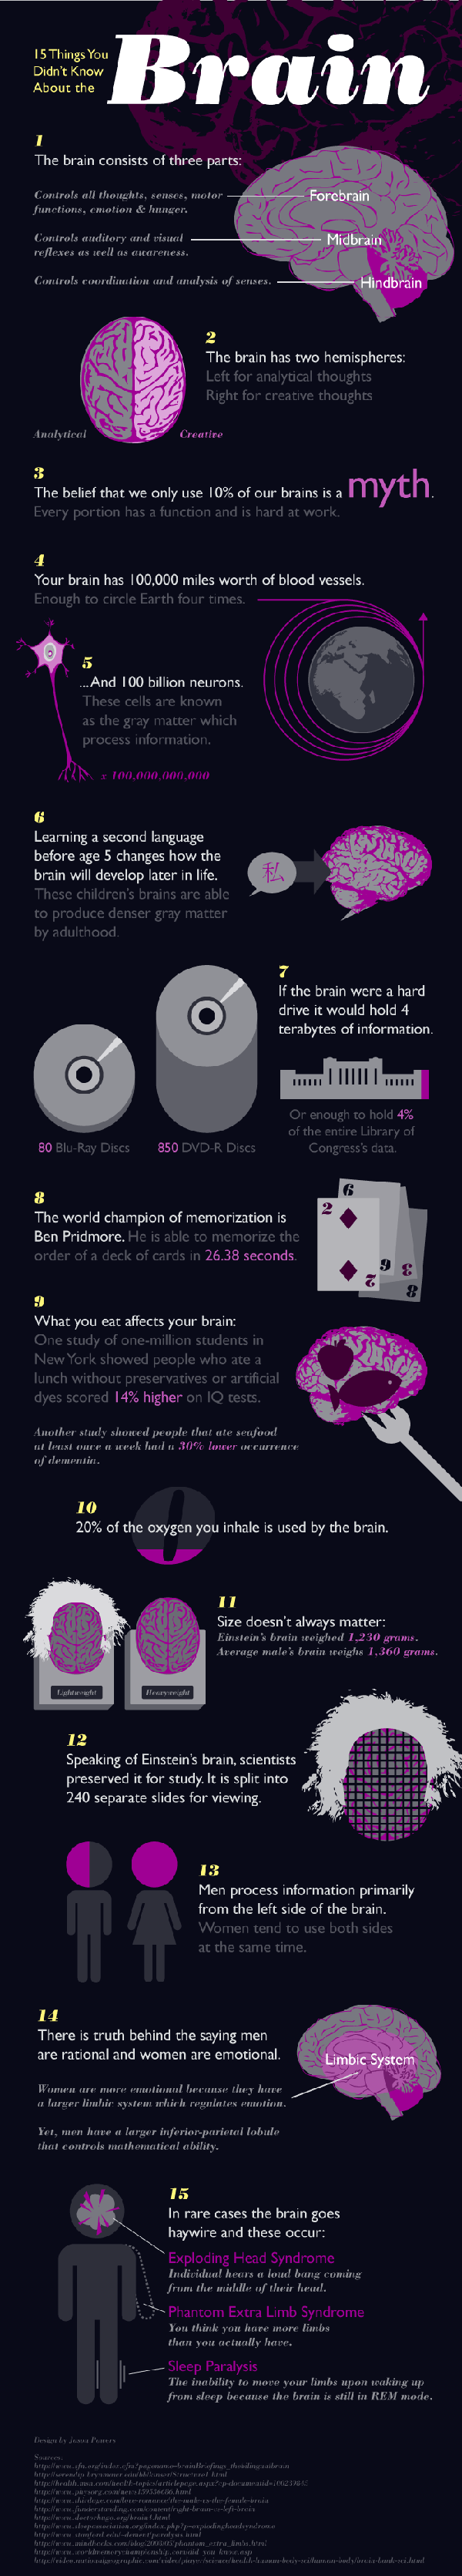 Interesting things about brain